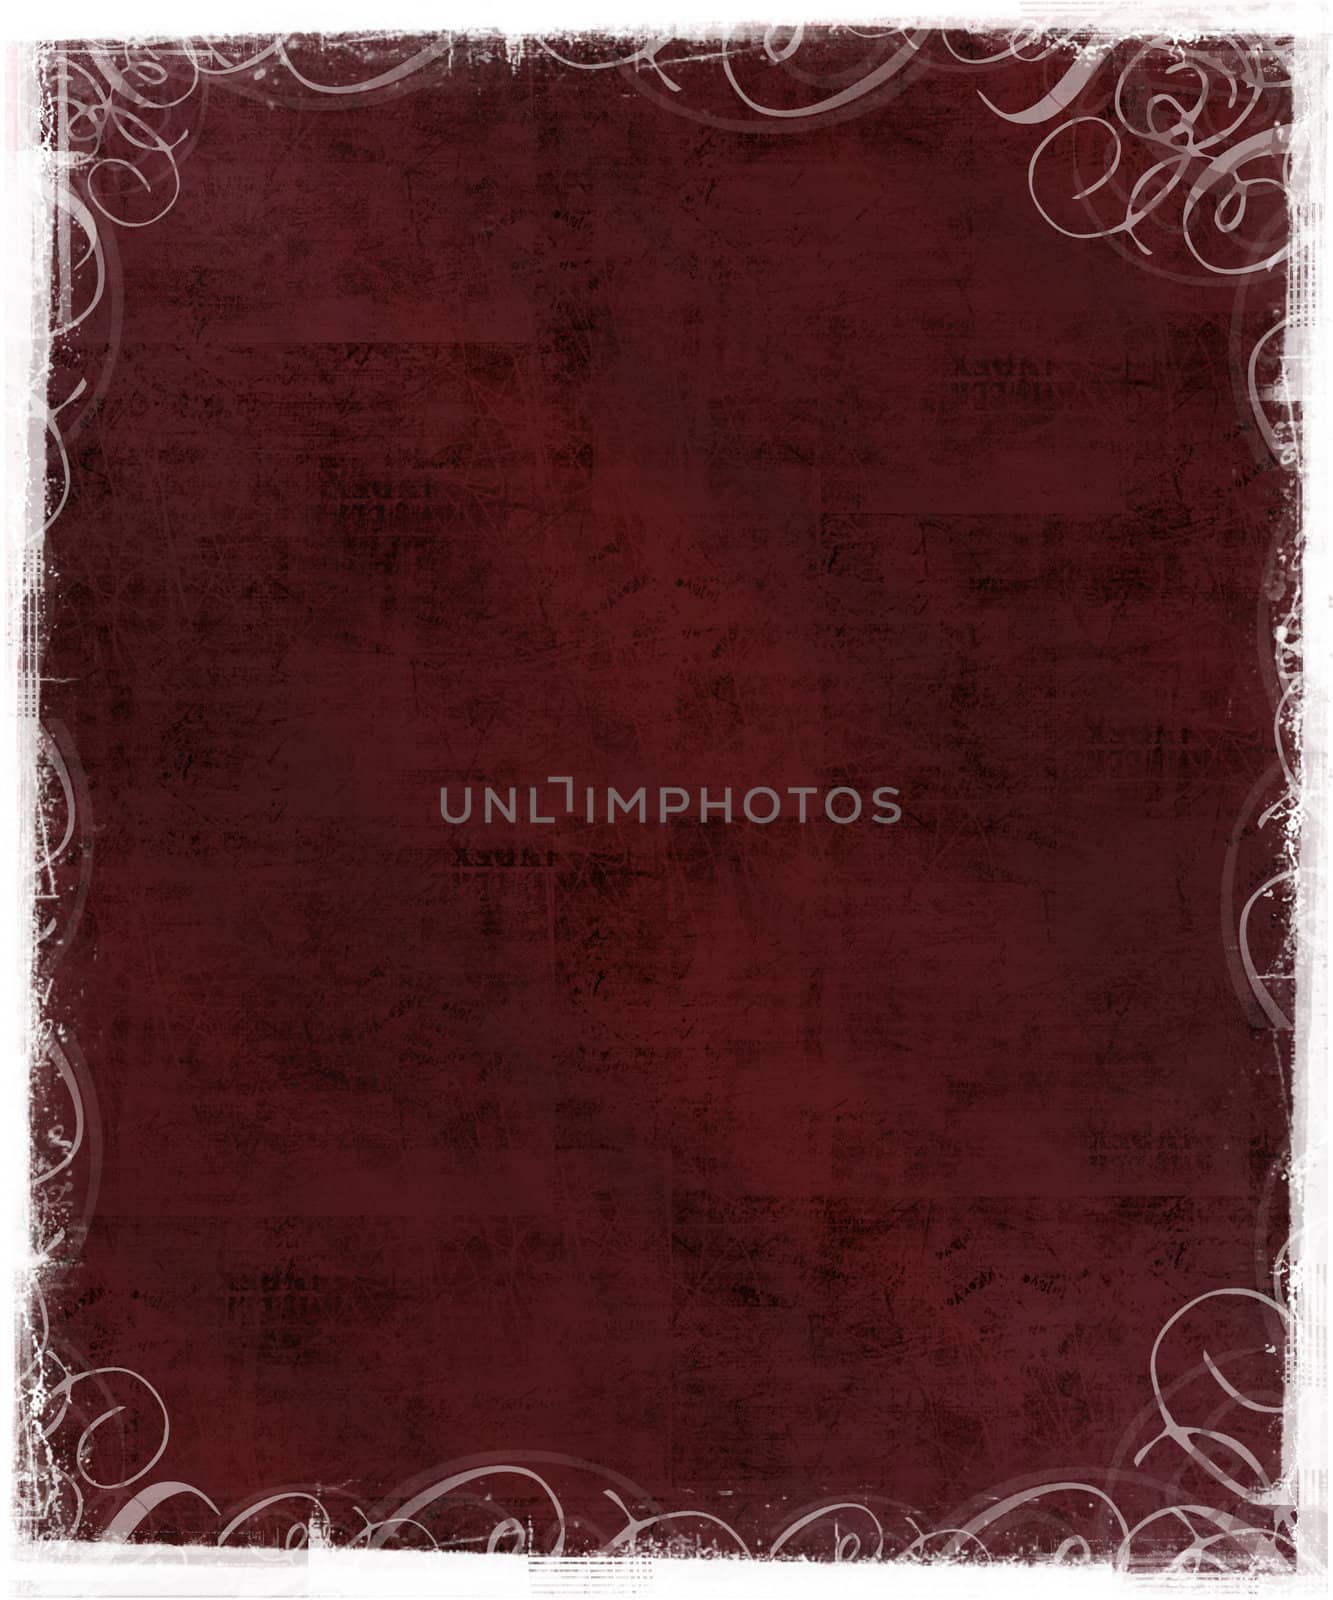 Old Textured Background with Classic Victorian Frame